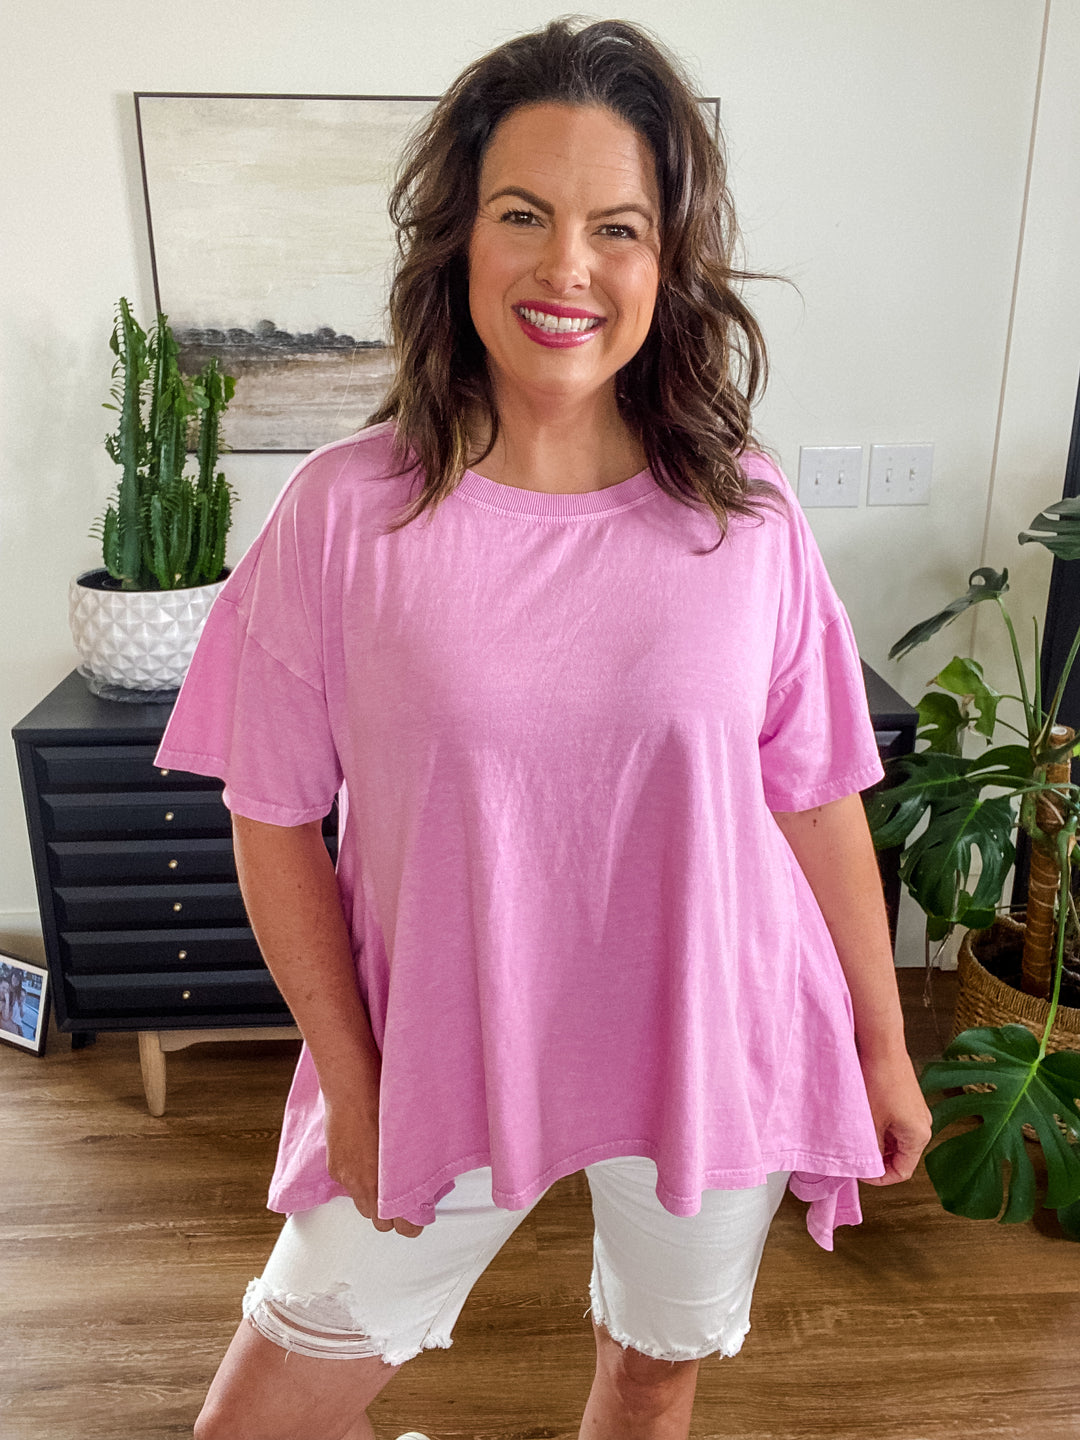 Cotton Candy Sharkbite Jersey Knit Top by Easel